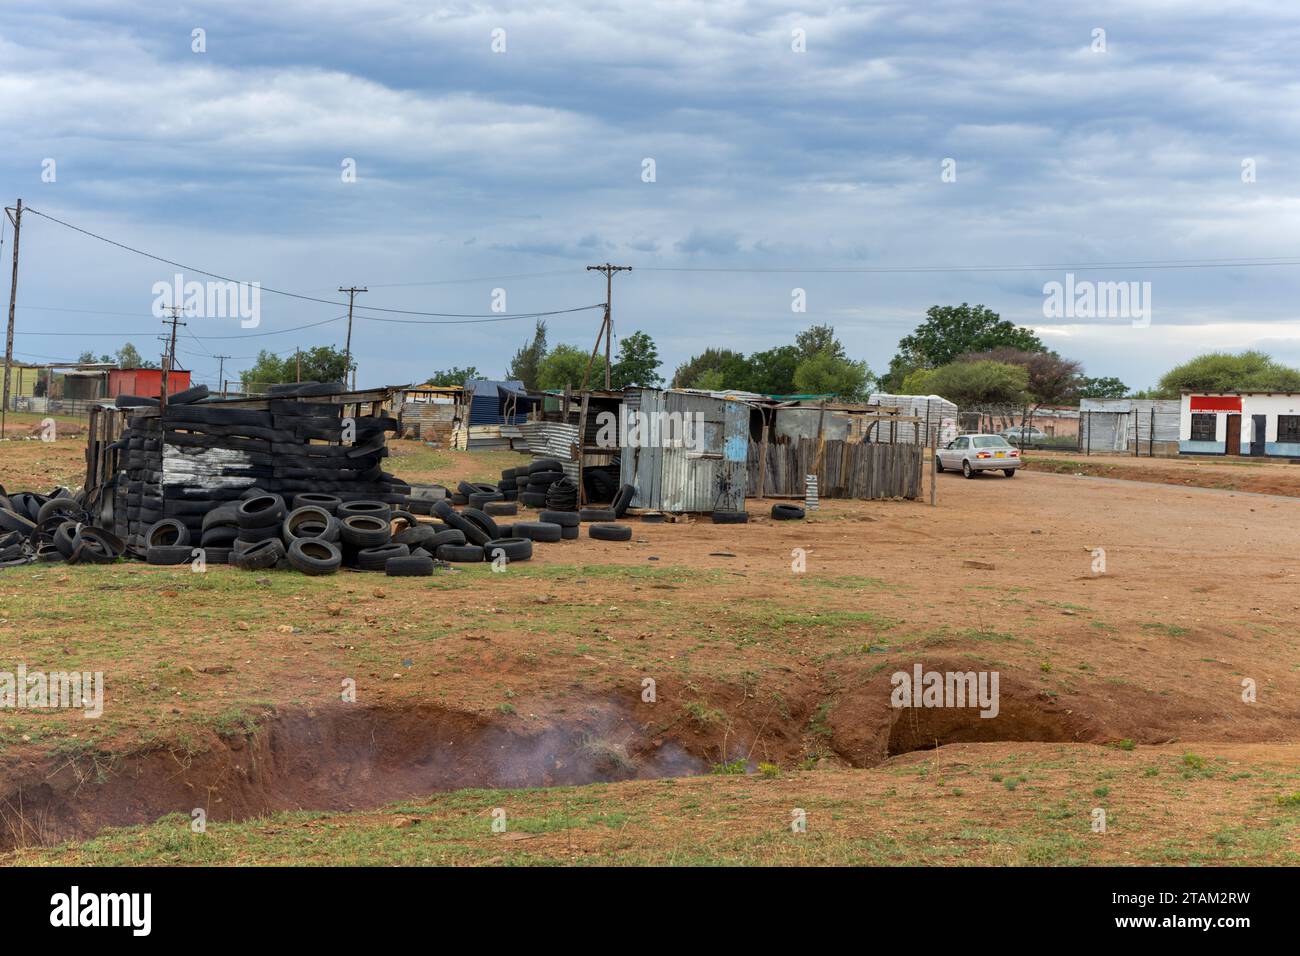 township informal settlement, shanty town made of corrugated iron sheets and tiers, smoking ditch in front Stock Photo